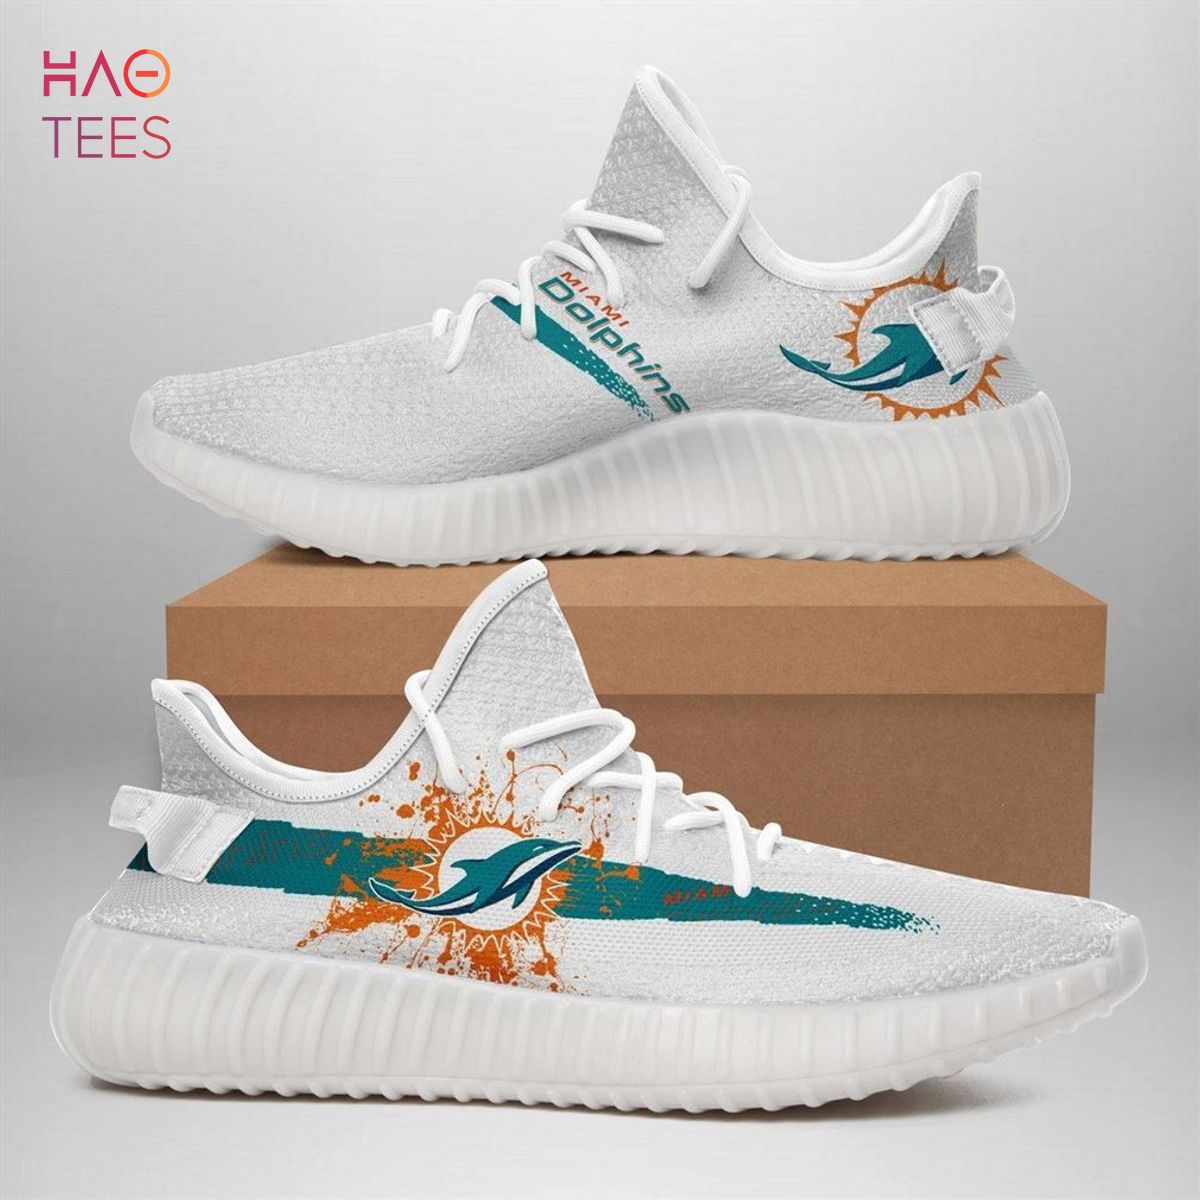 Miami Dolphins Nfl Sport Teams Runing Yeezy Sneakers Shoes